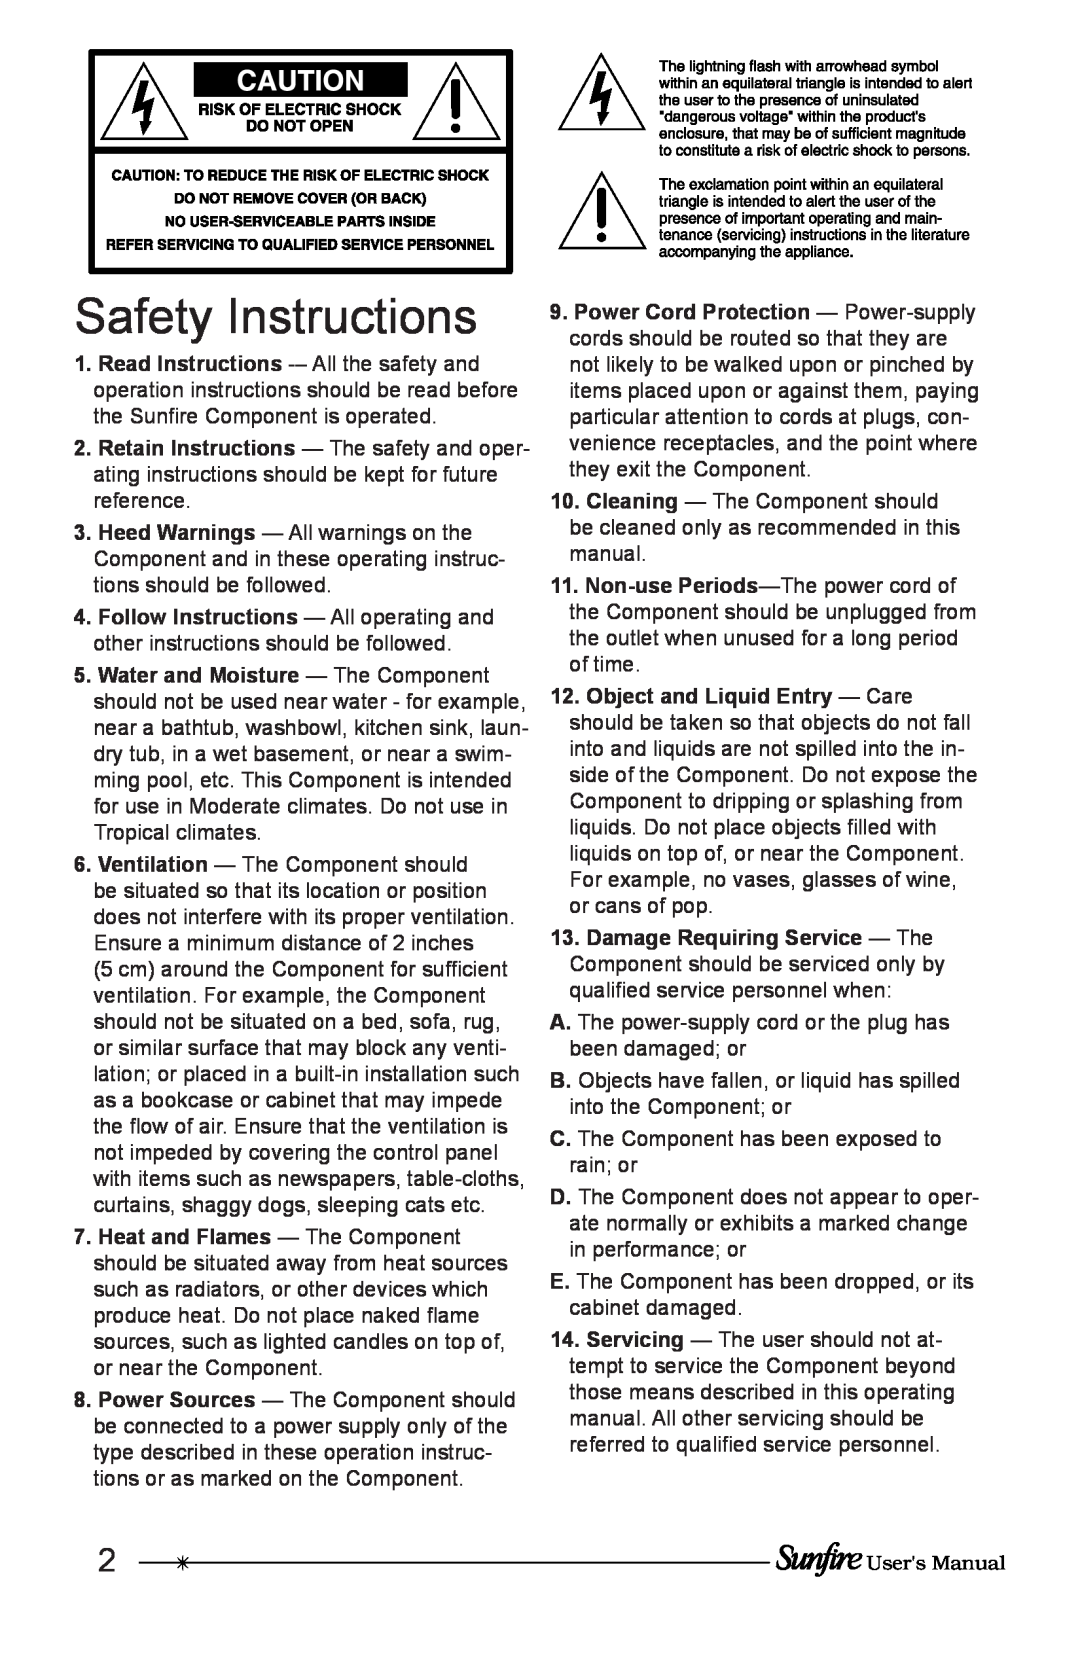 Sunfire Home Theater System manual Safety Instructions 